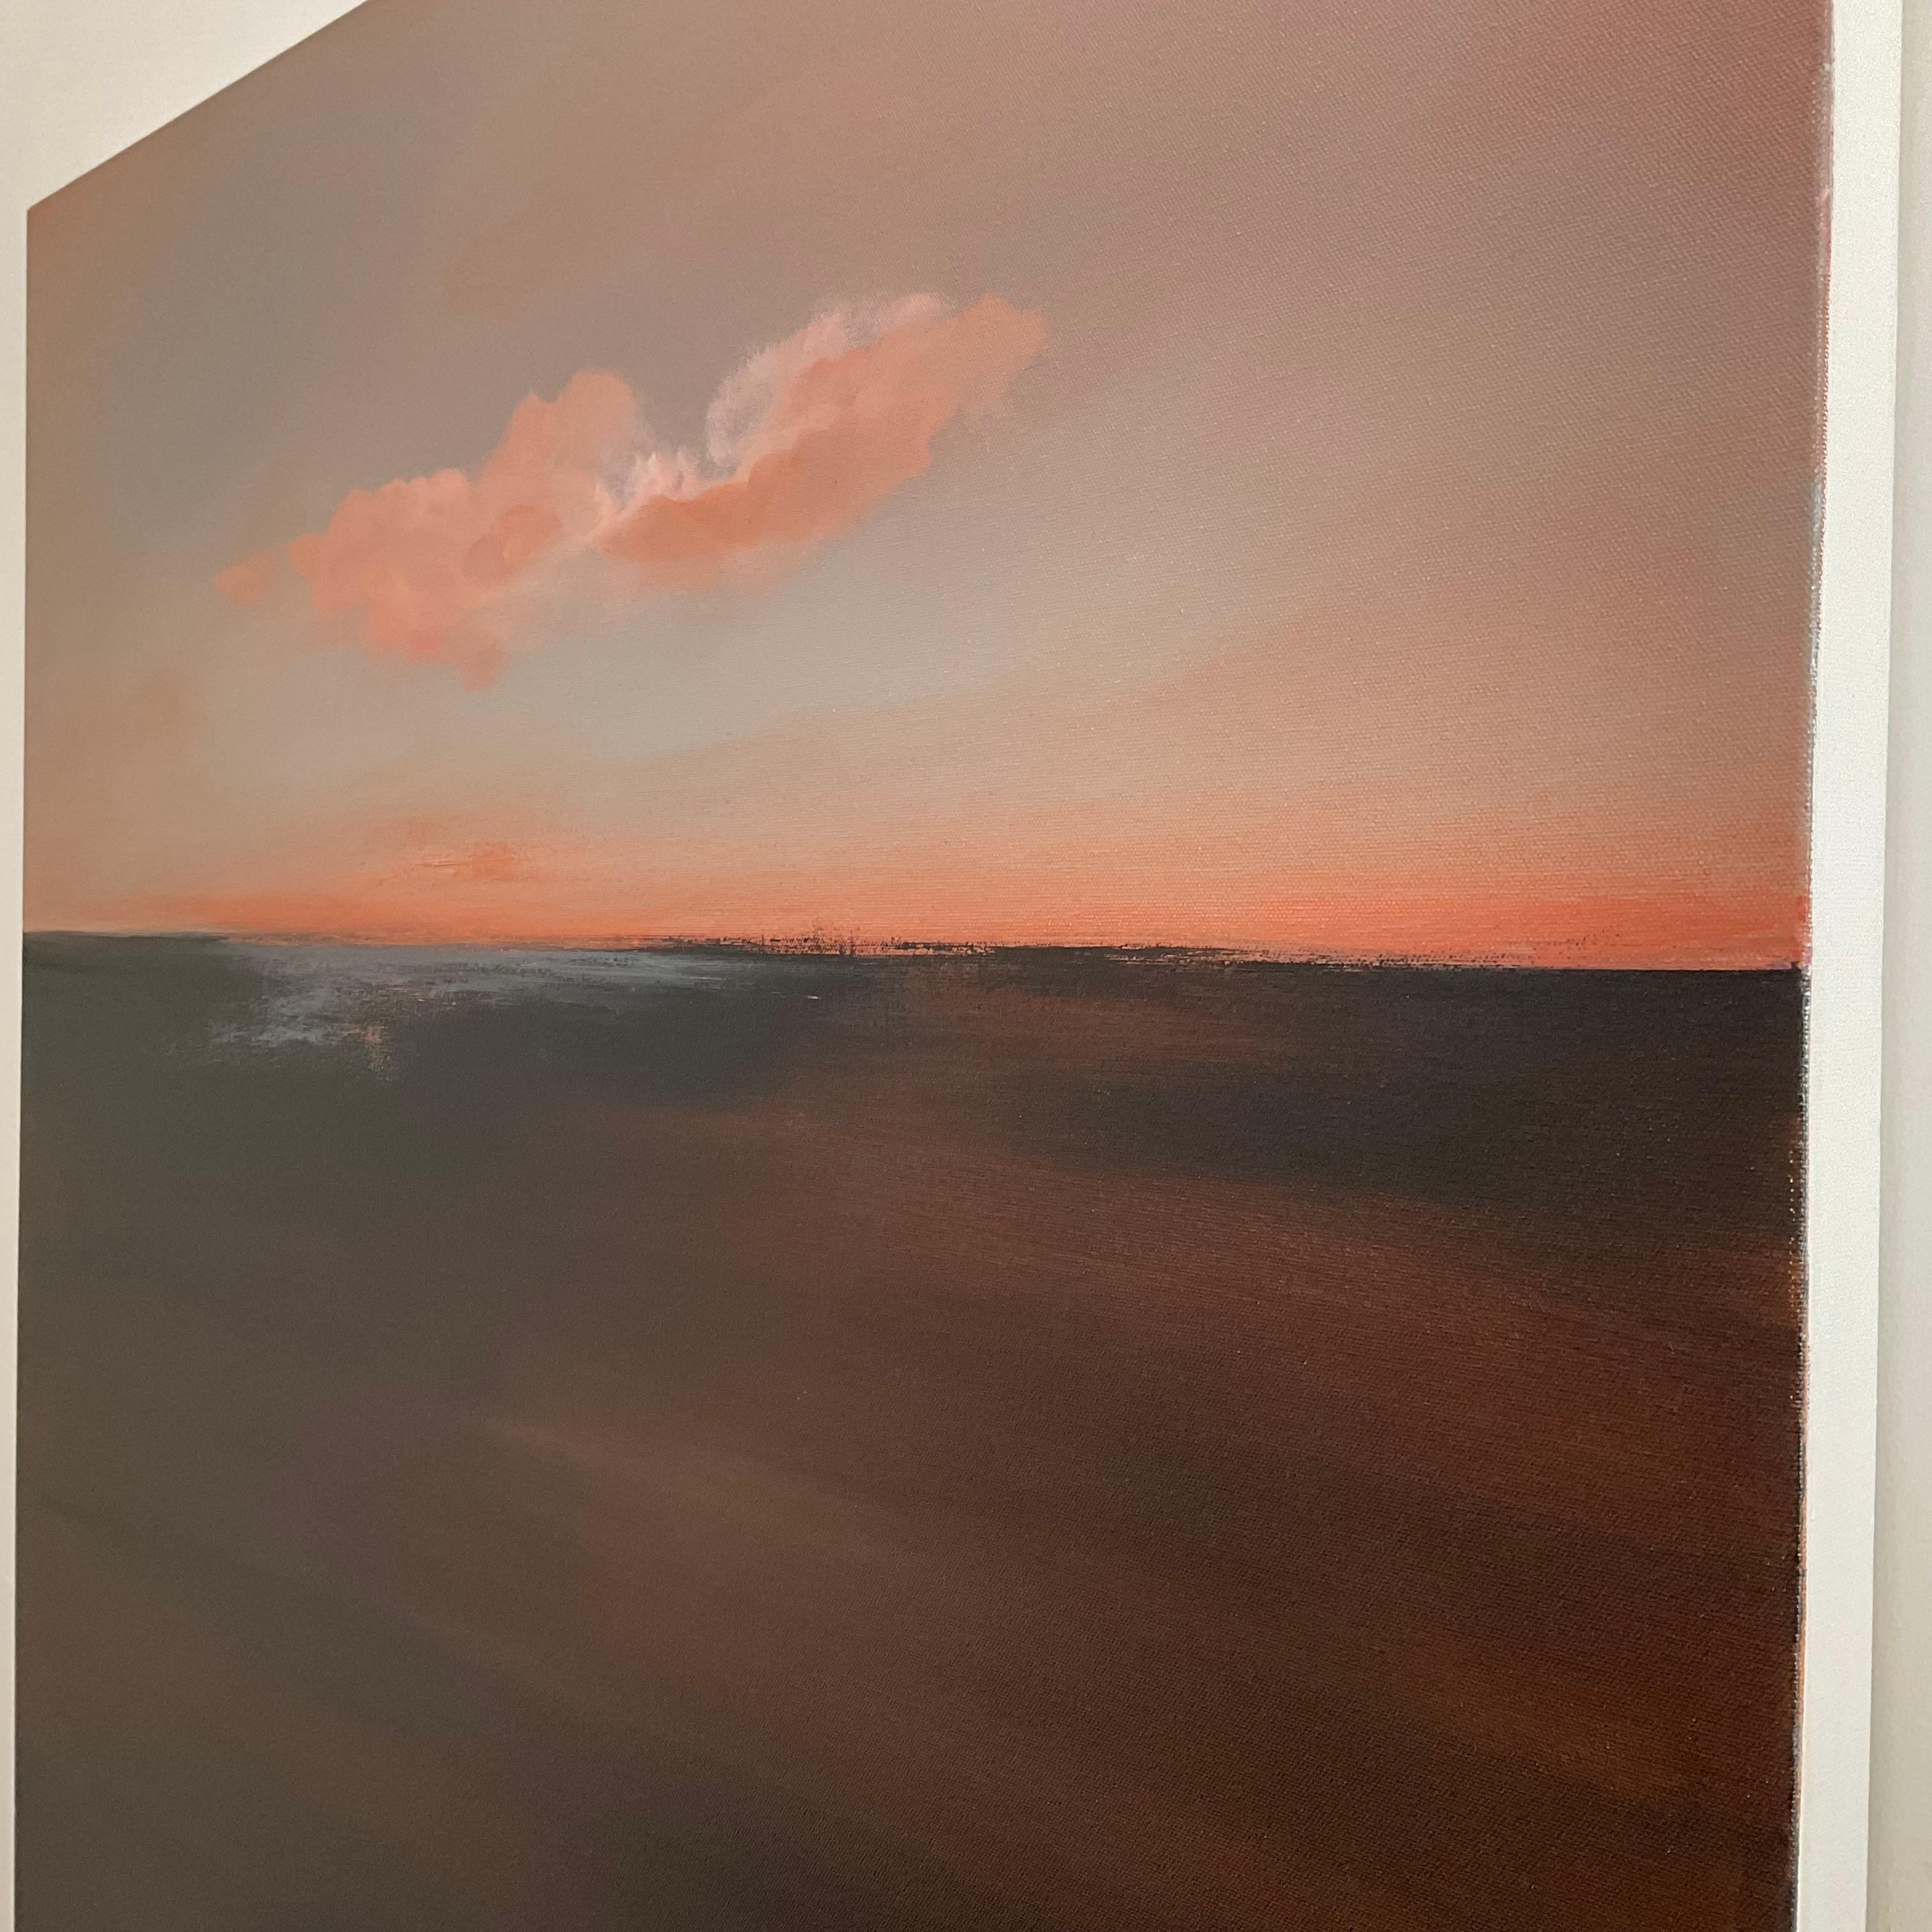 ‘Morning Calm’ is a semi-abstract oil painting on deep canvas. The warm glow of pale peach clouds are painted against a pale blue sky. The lower section of the painting has been abstracted - leaving out details in order to give the focus on the sky